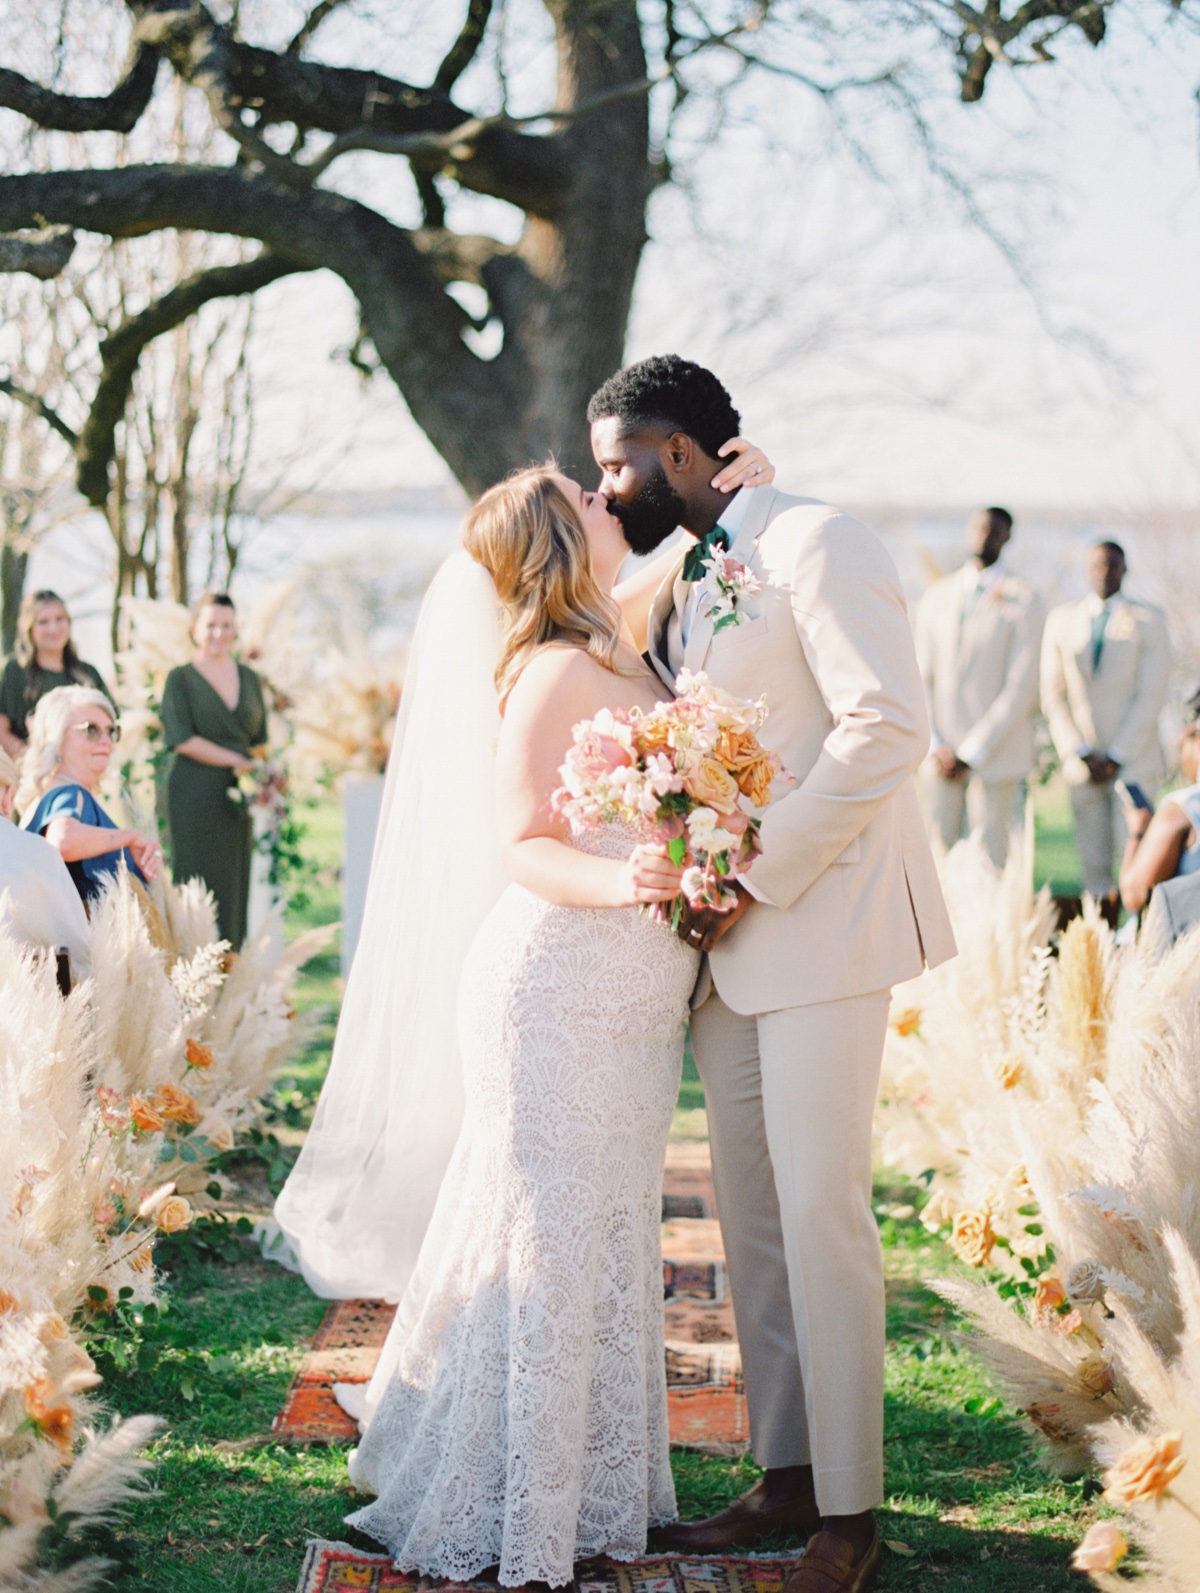 To Dallas, From Austin: This $50,000 Sentimental Bohemian Wedding Is a Must See